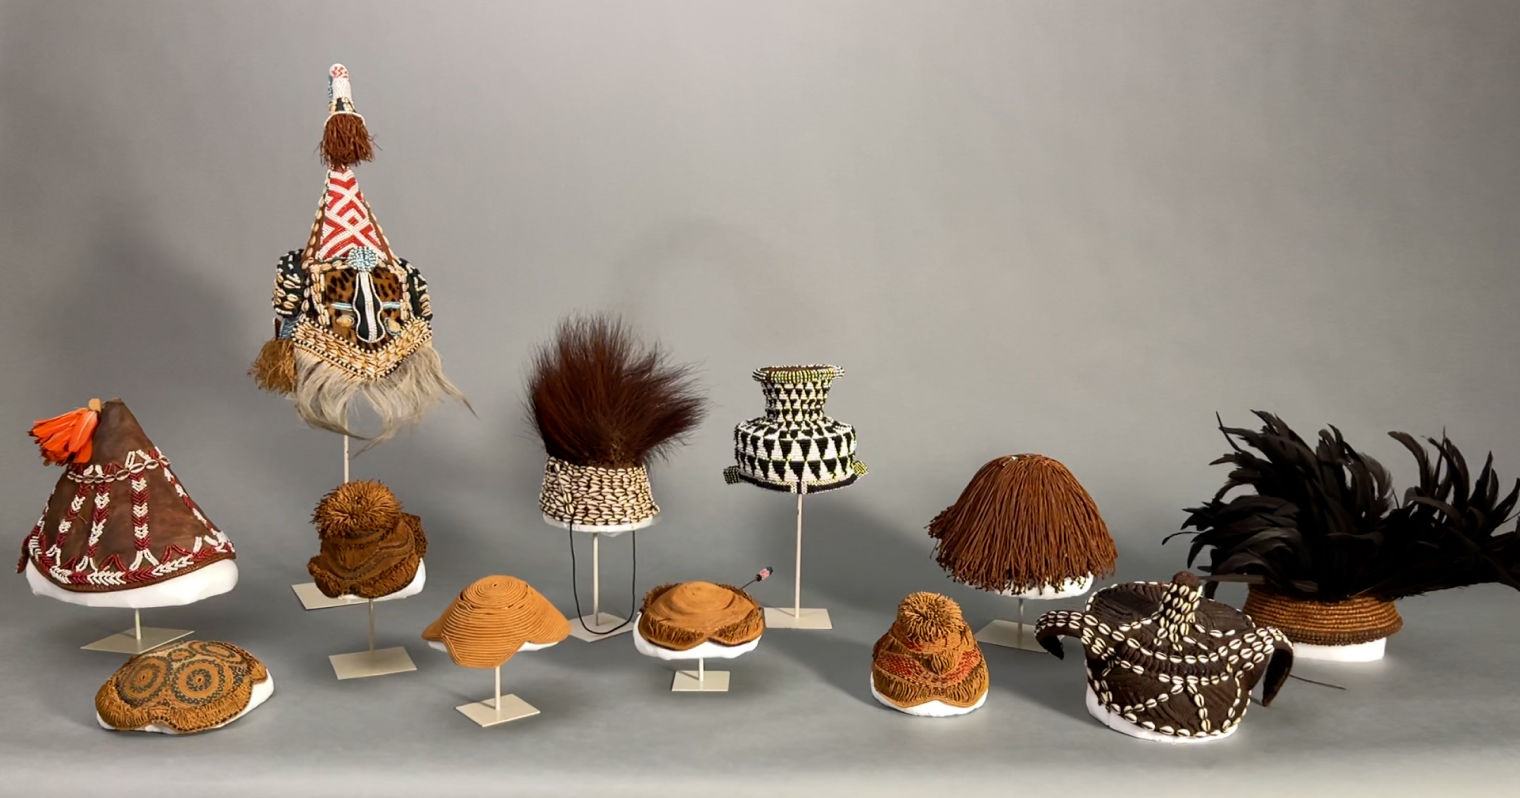 Hats designed by Lilly Daché on a gray background